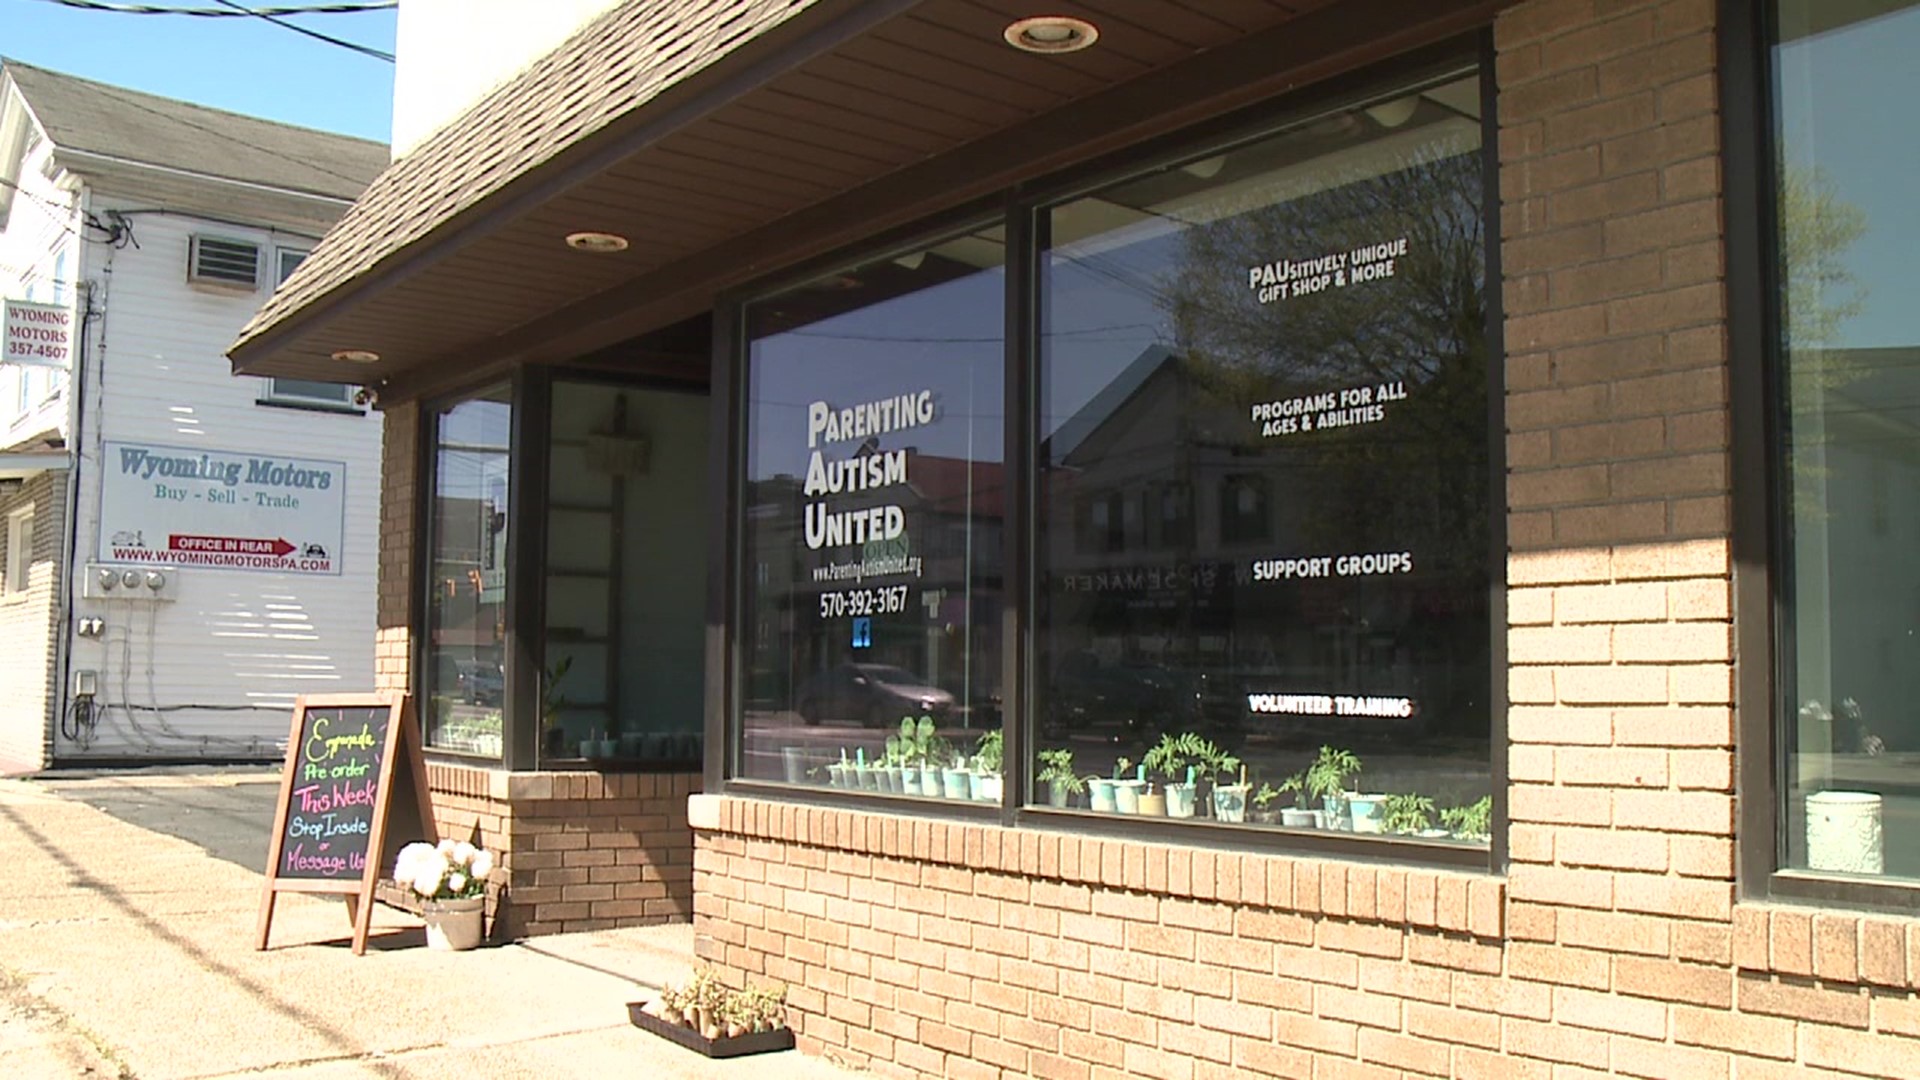 What was home to Pepe's Video is now home to three businesses focused on community support and therapy services.